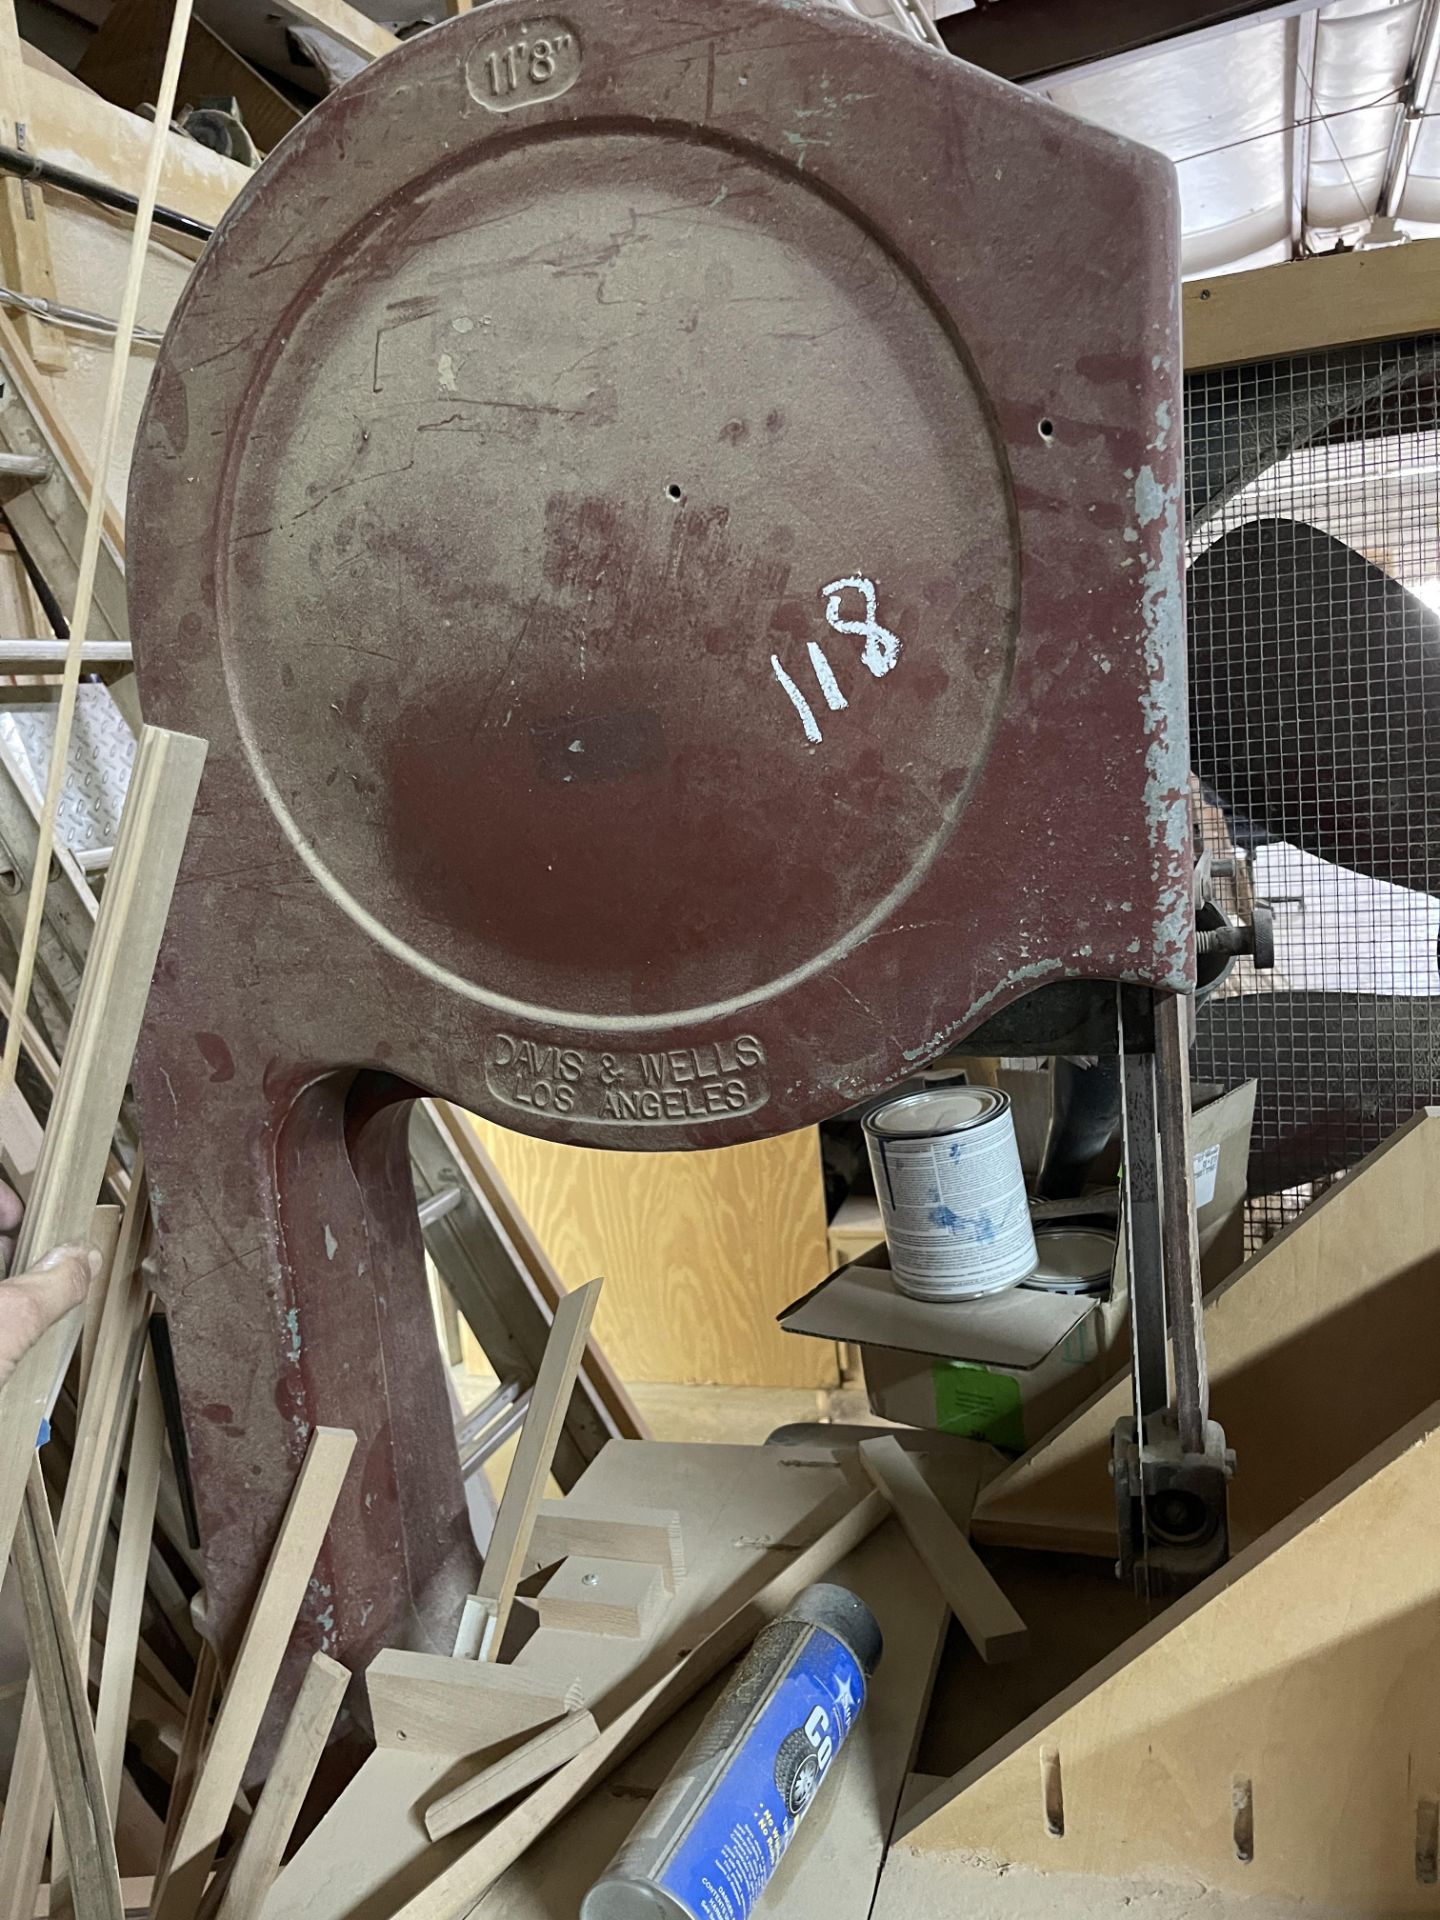 Davis & Wells Band Saw Can still get parts for this machine! Can be used as resaw